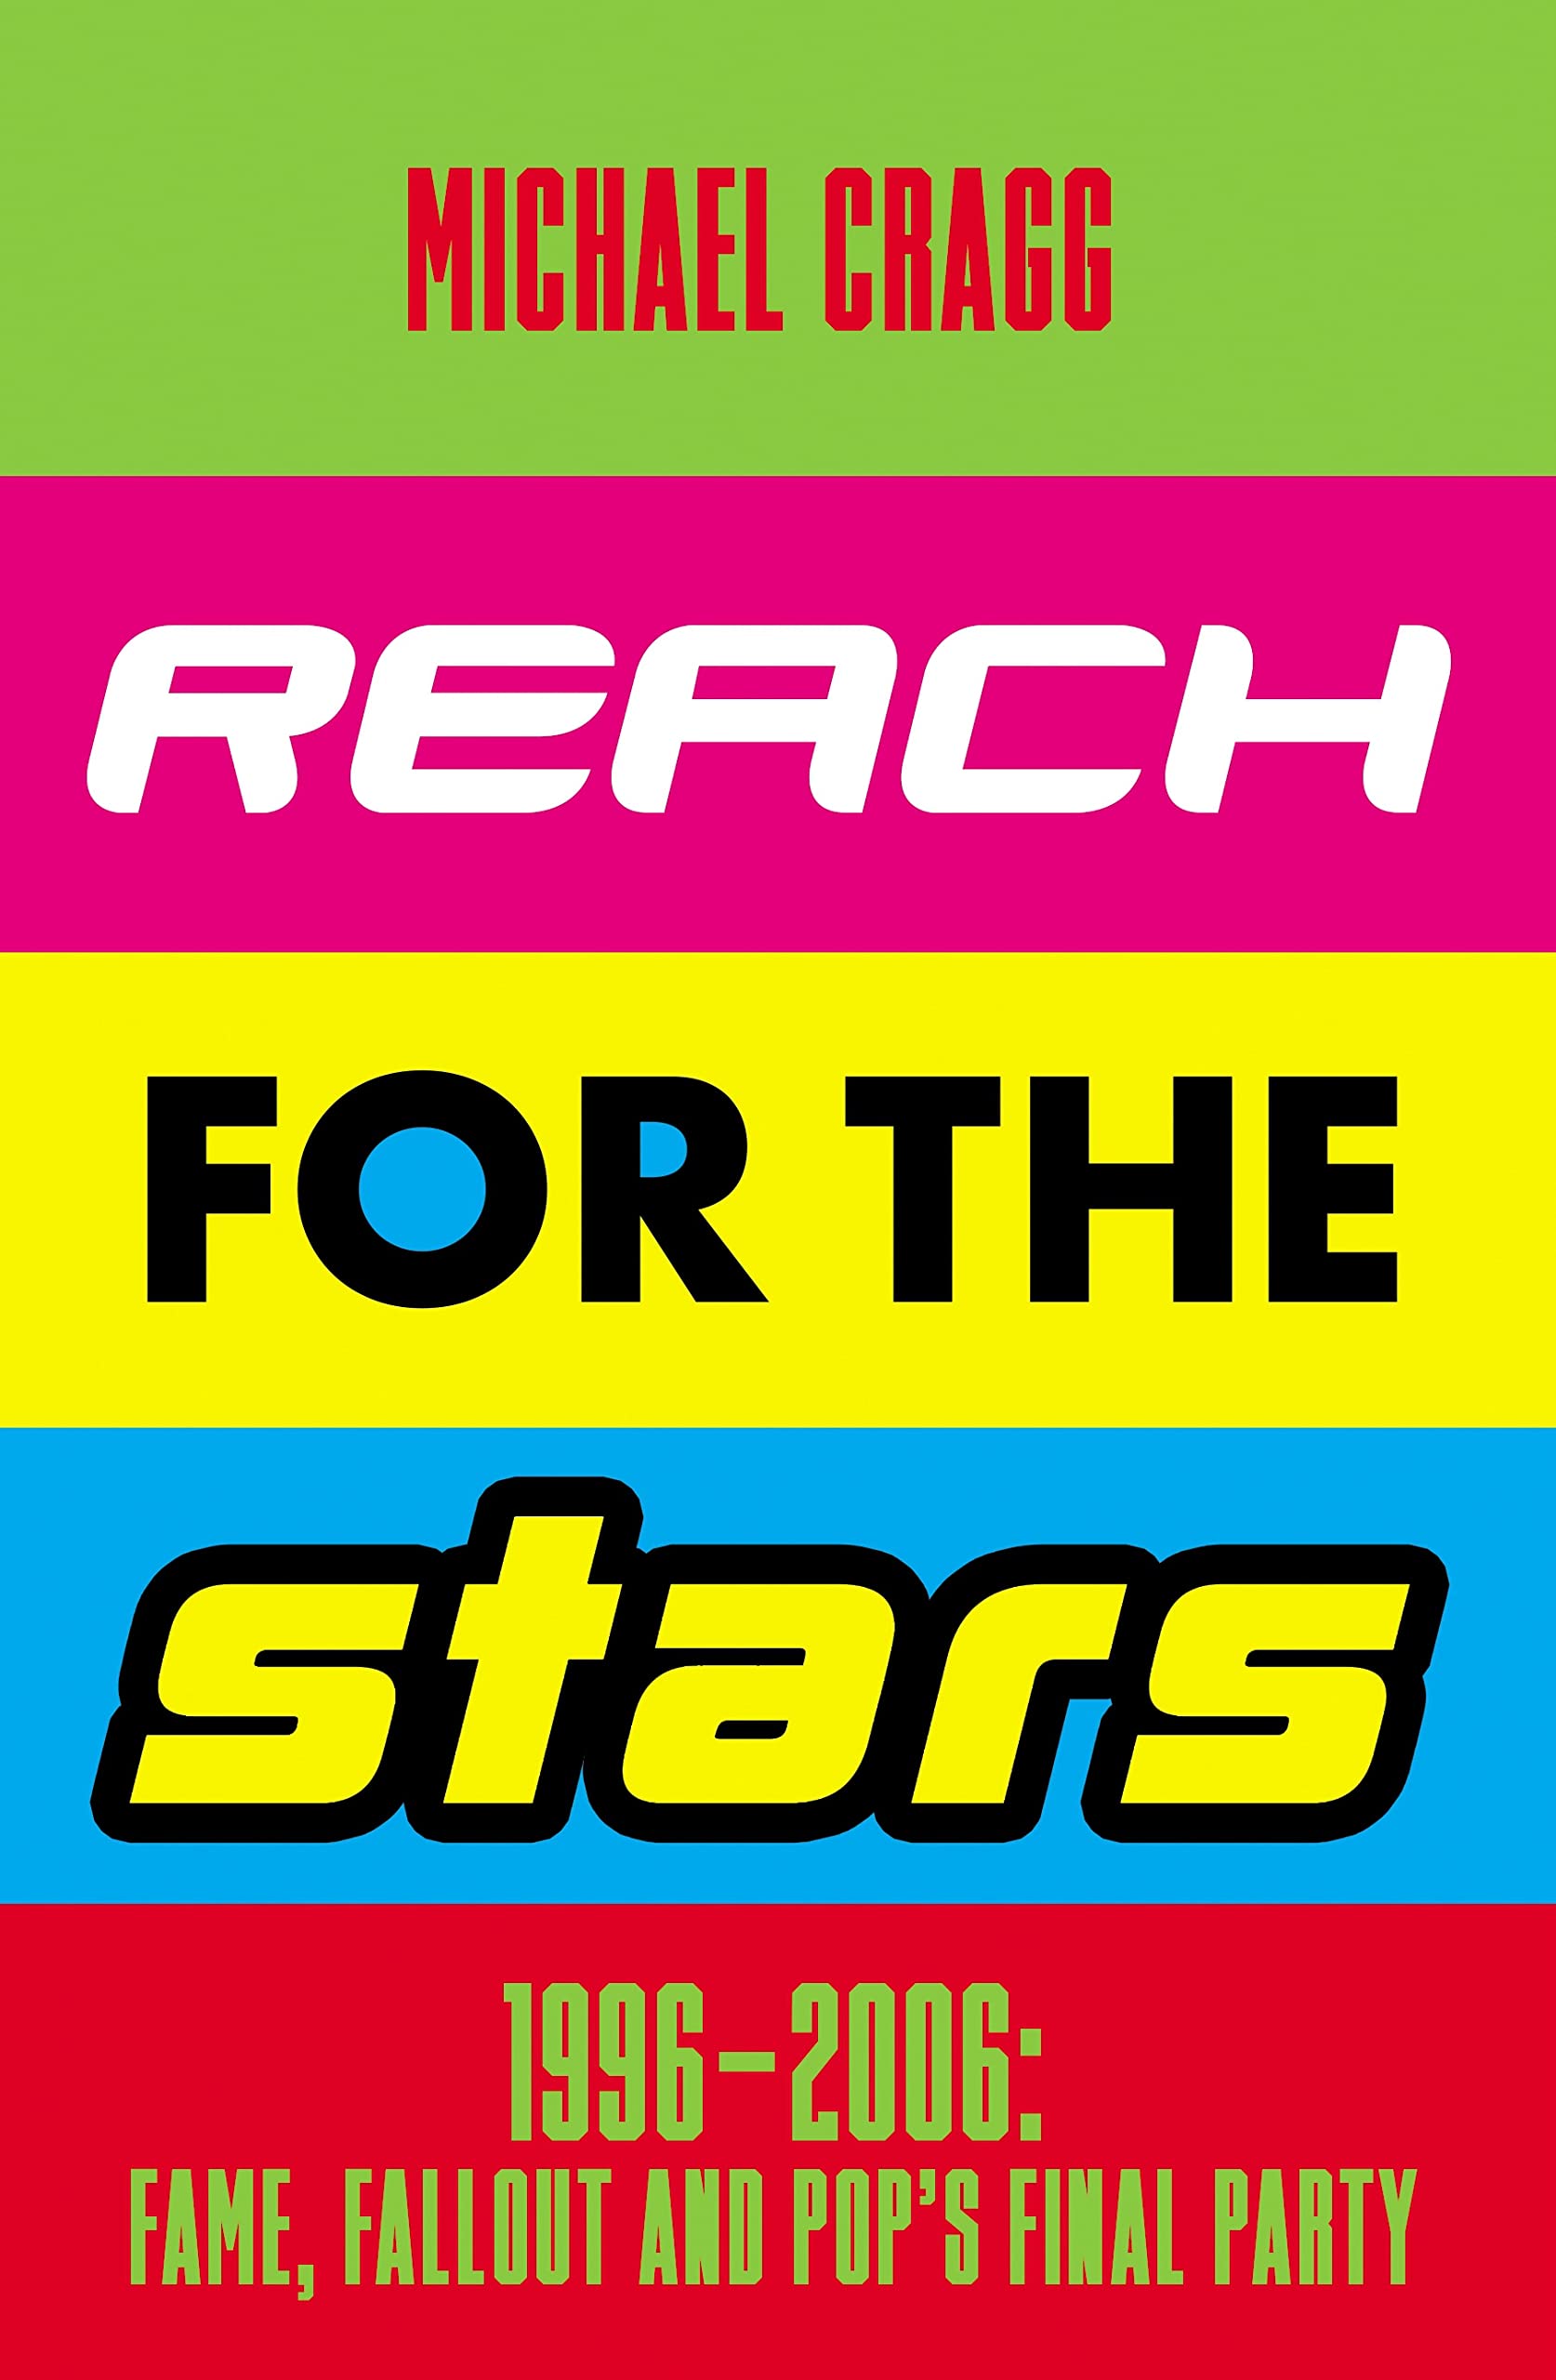 Reach for the stars paperback book